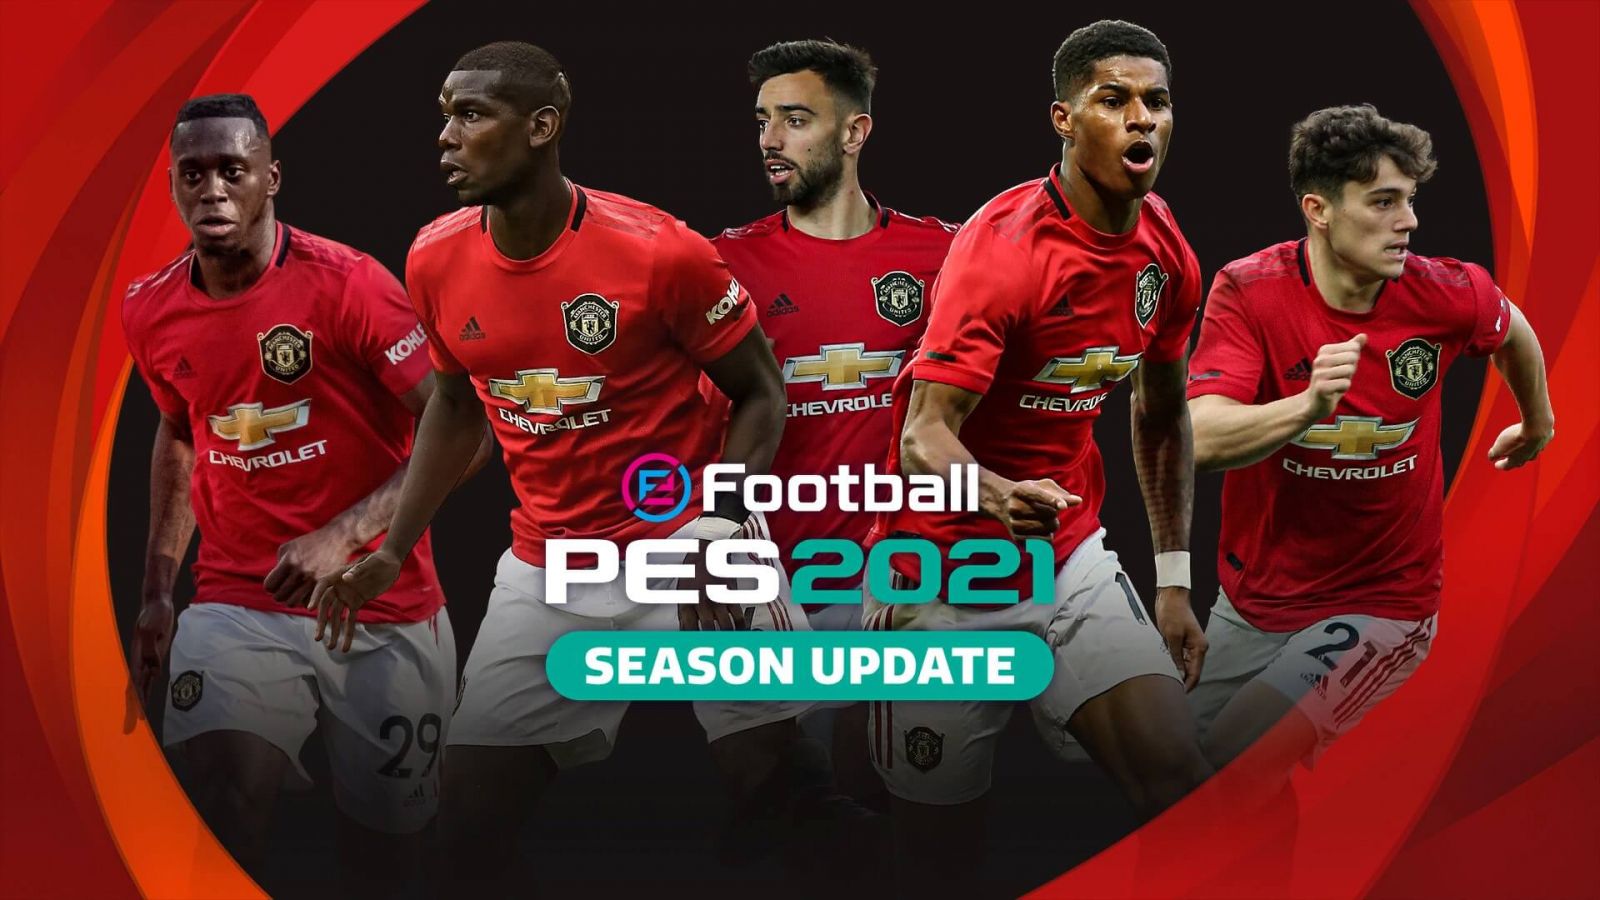 Free download Manchester United 2021 Team Wallpaper [1920x1080] for your Desktop, Mobile & Tablet. Explore Manchester United 2021 Wallpaper. Manchester United Wallpaper, Free Manchester United Wallpaper, Manchester United HD Wallpaper